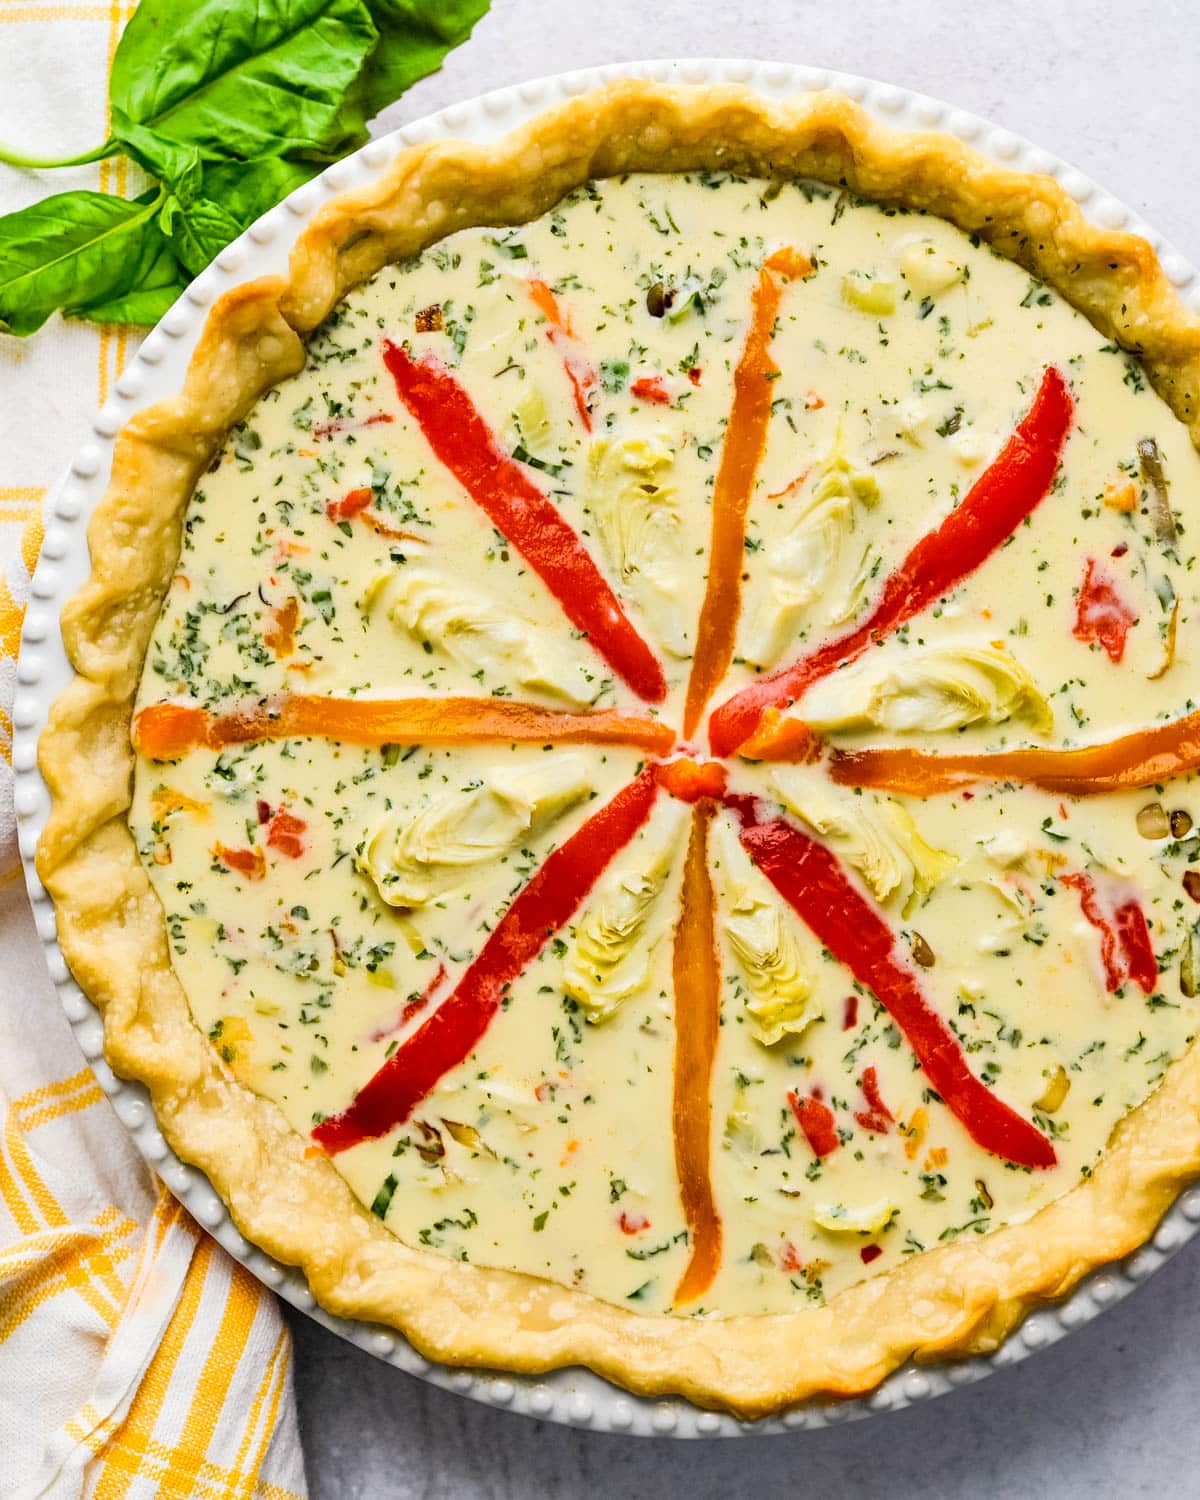 Filling the pastry shell and arranging the vegetables on top of the quiche.